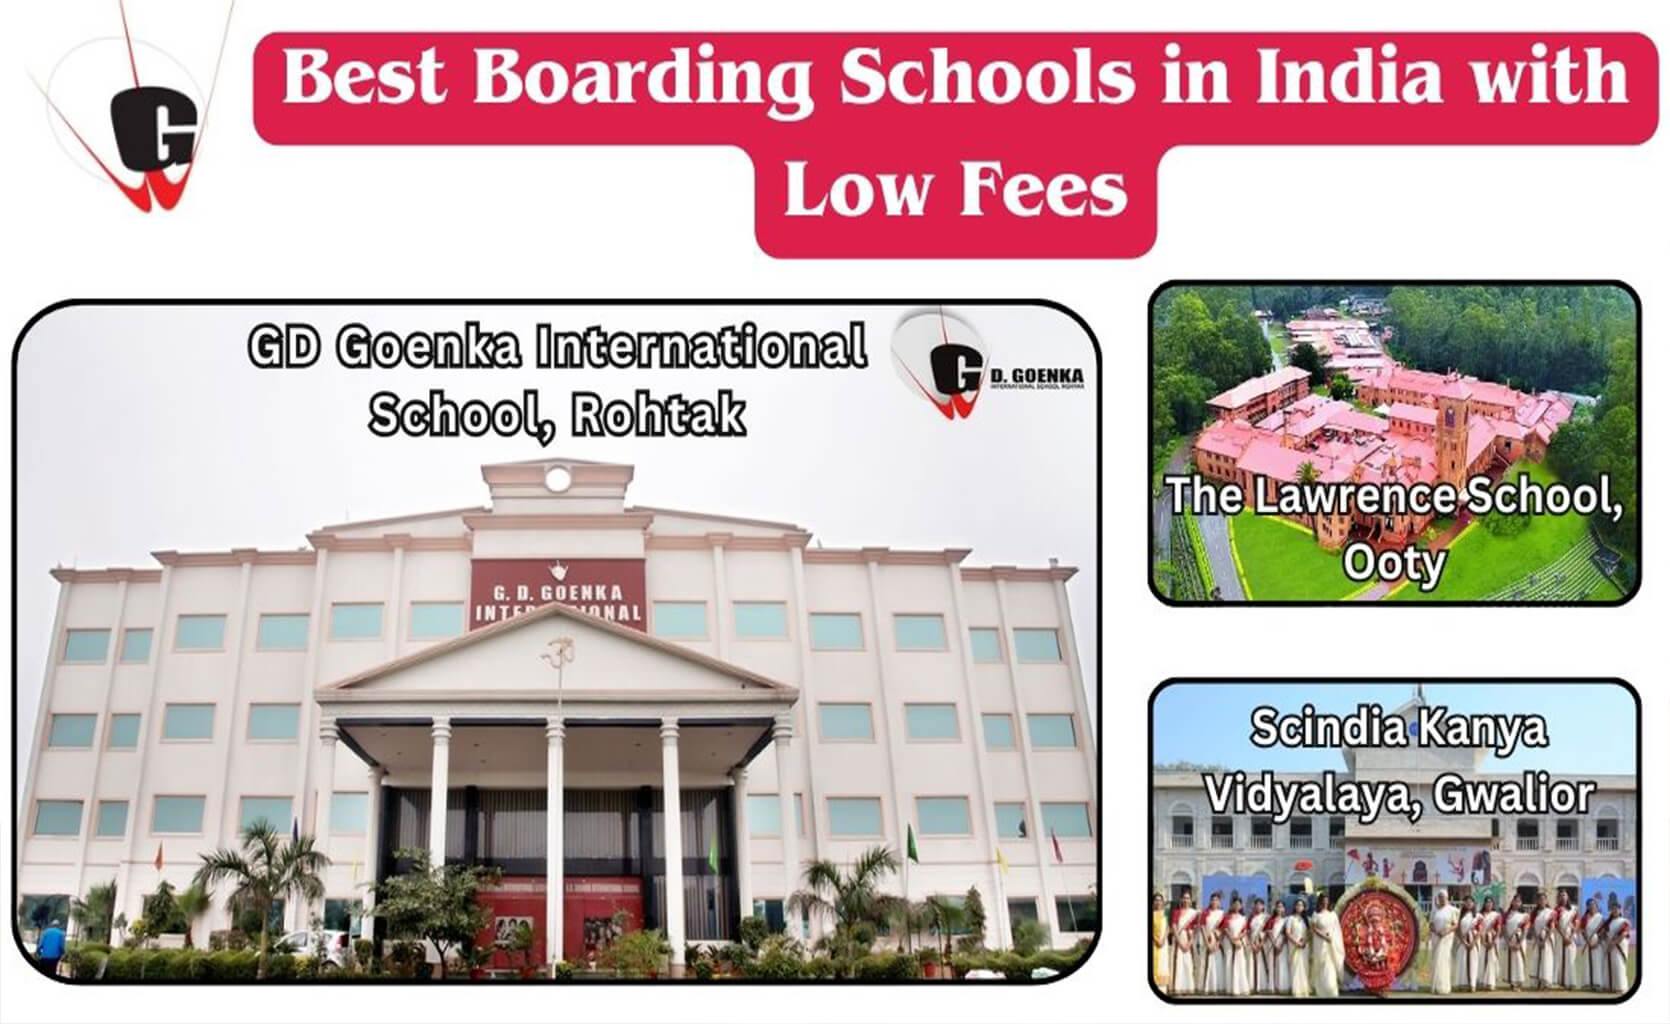 Best Boarding Schools in India with Low Fees